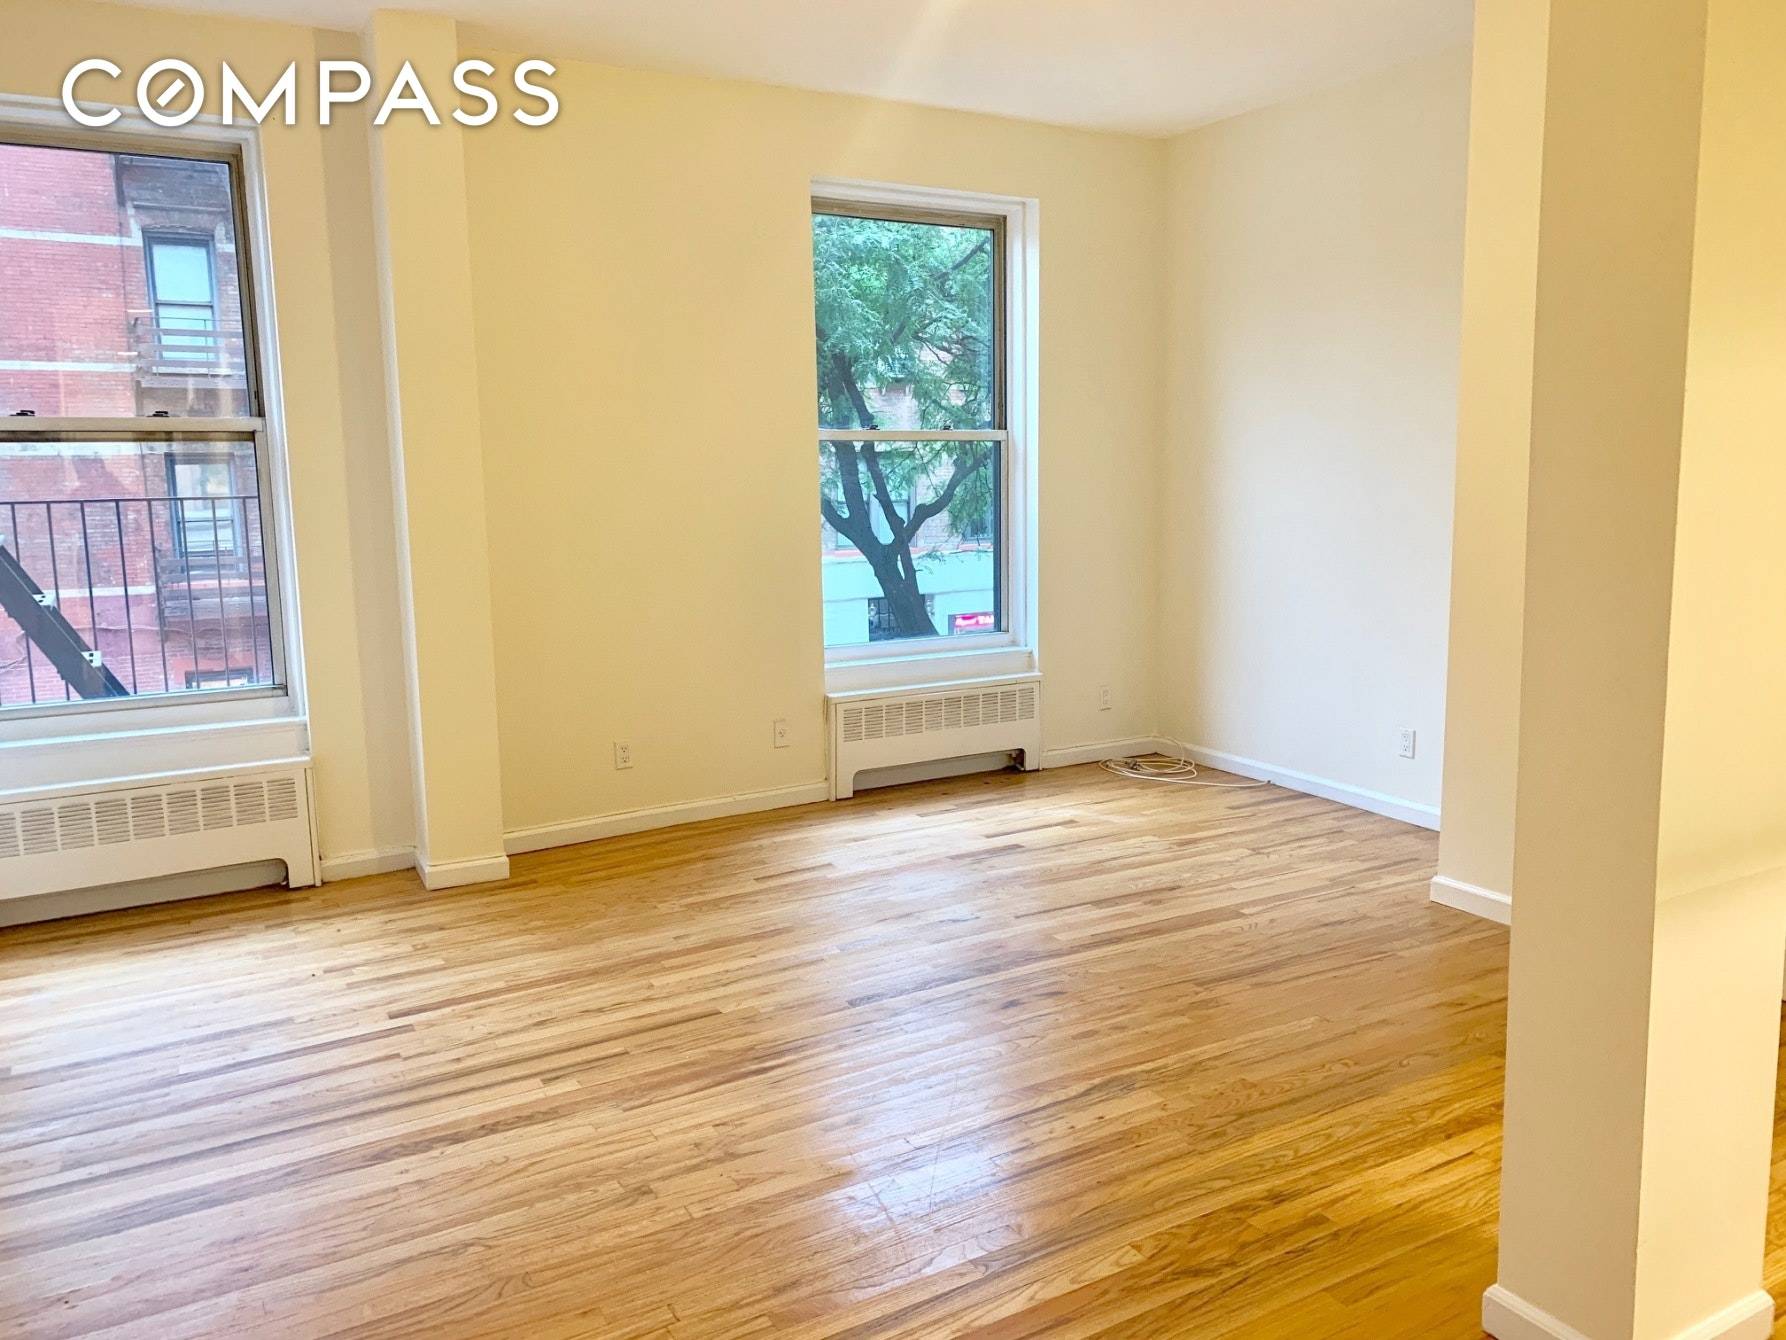 Welcome home to this spacious one bedroom apartment on a tree lined, quiet street at one of the best locations on the Upper West Side.